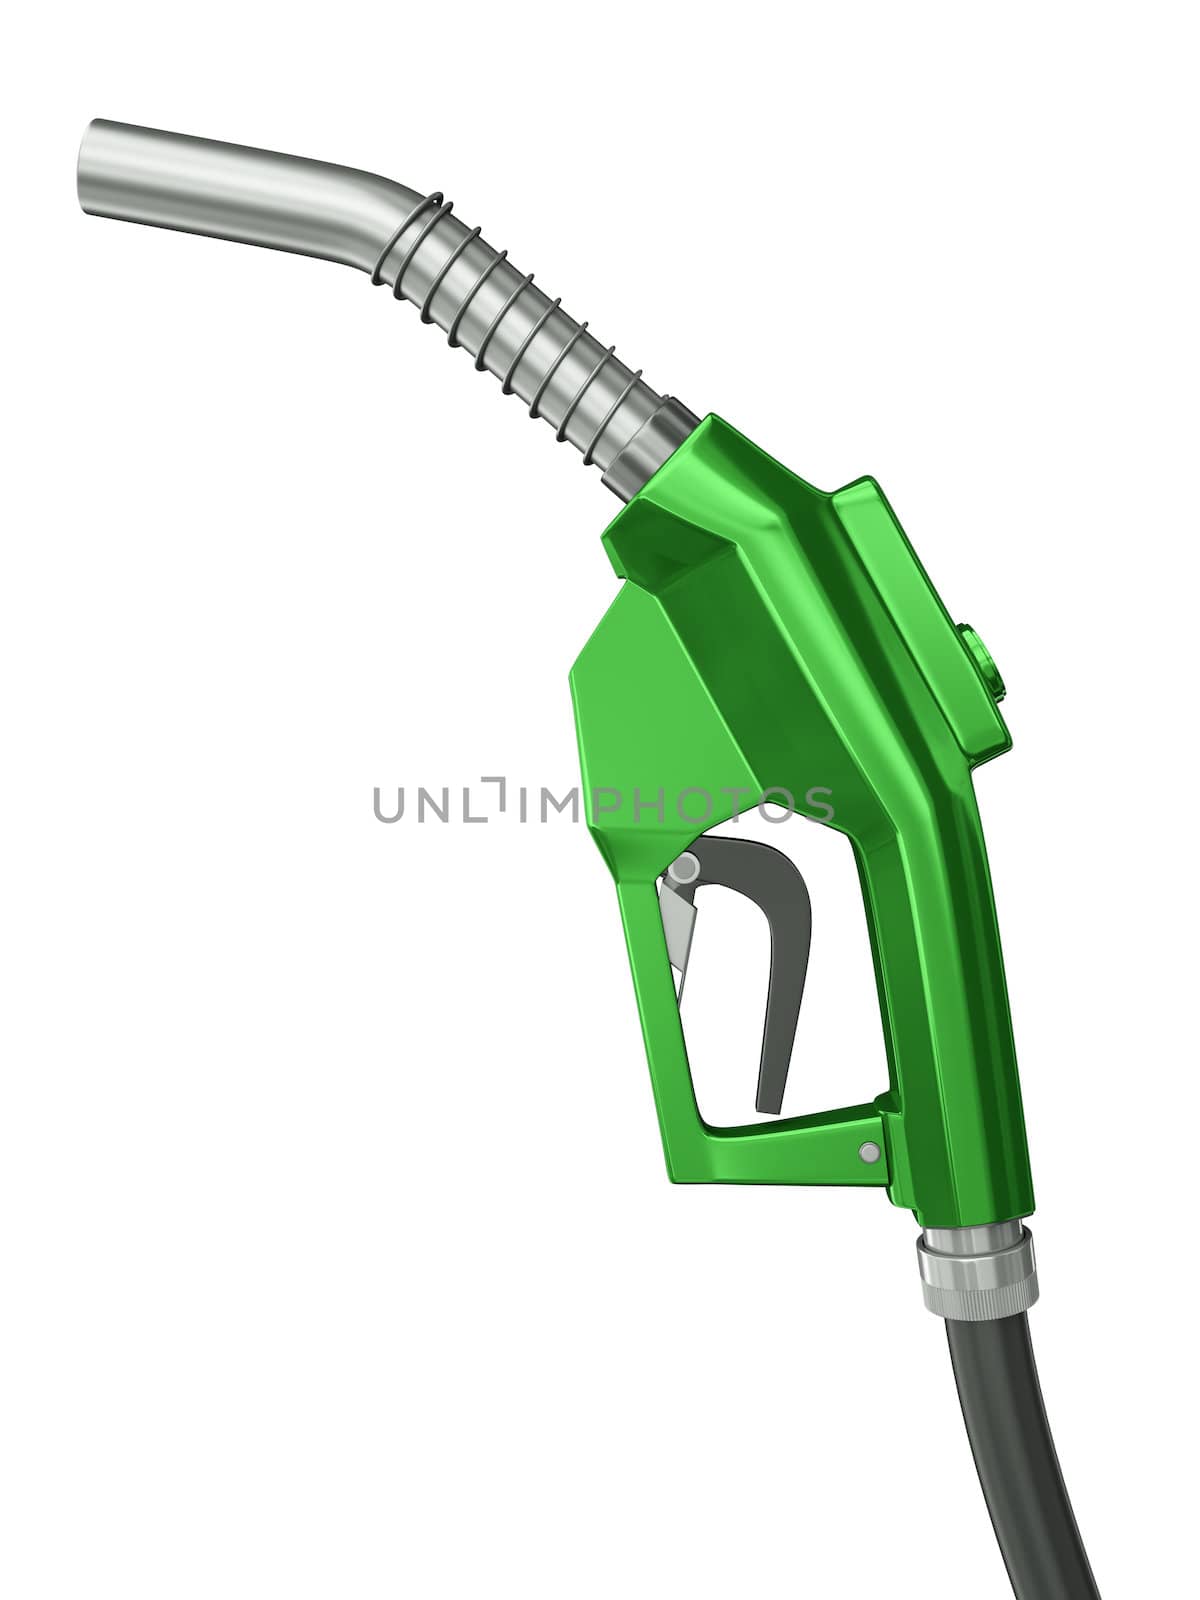 Green gas pump nozzle isolated on white background. 3D render.